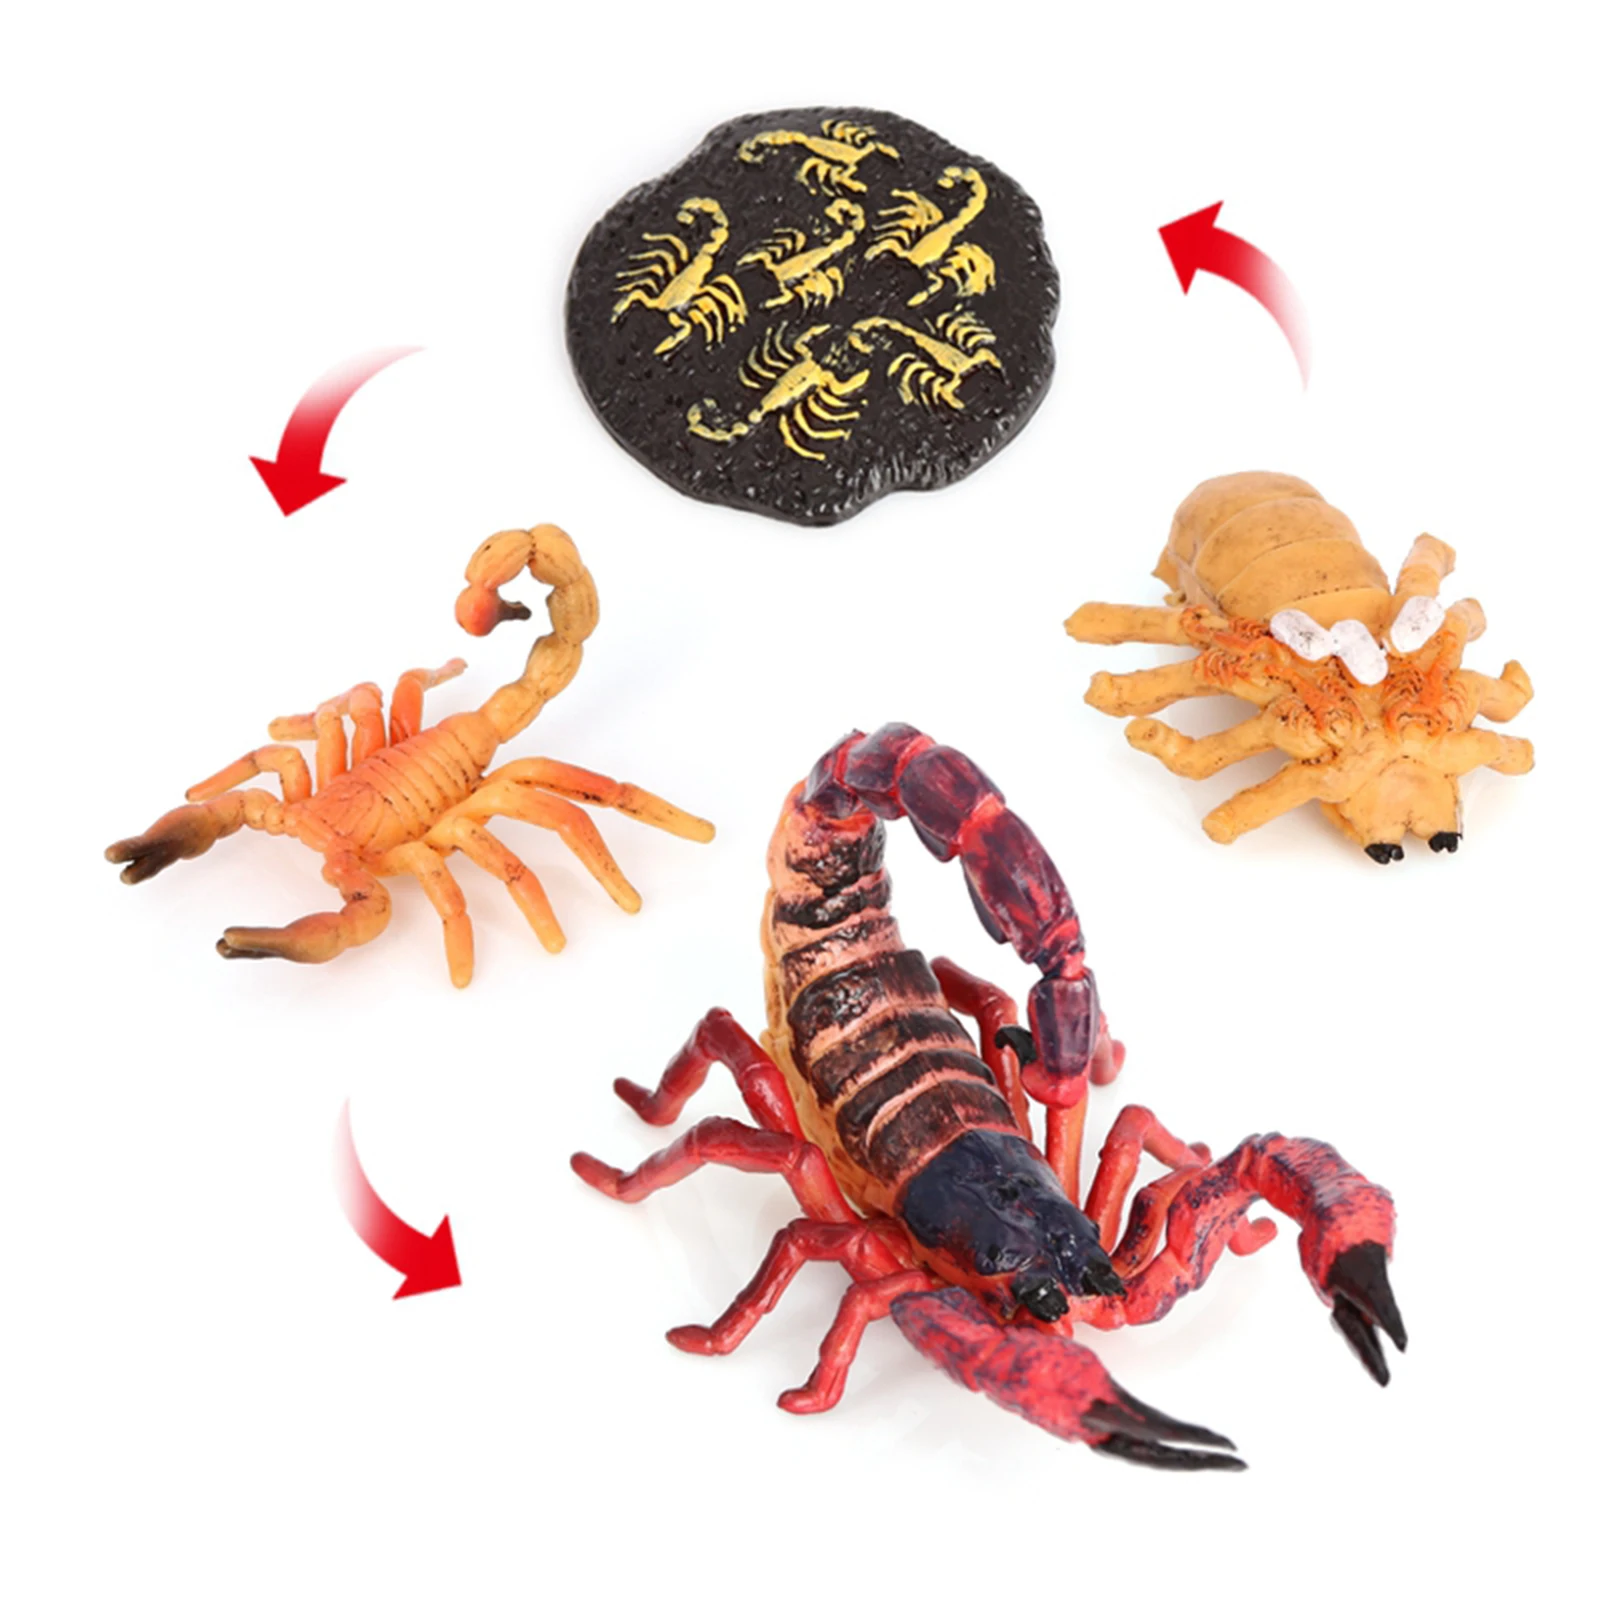 Growth Playset Scorpion Life Cycle Model Action Toy Children`s Preschool